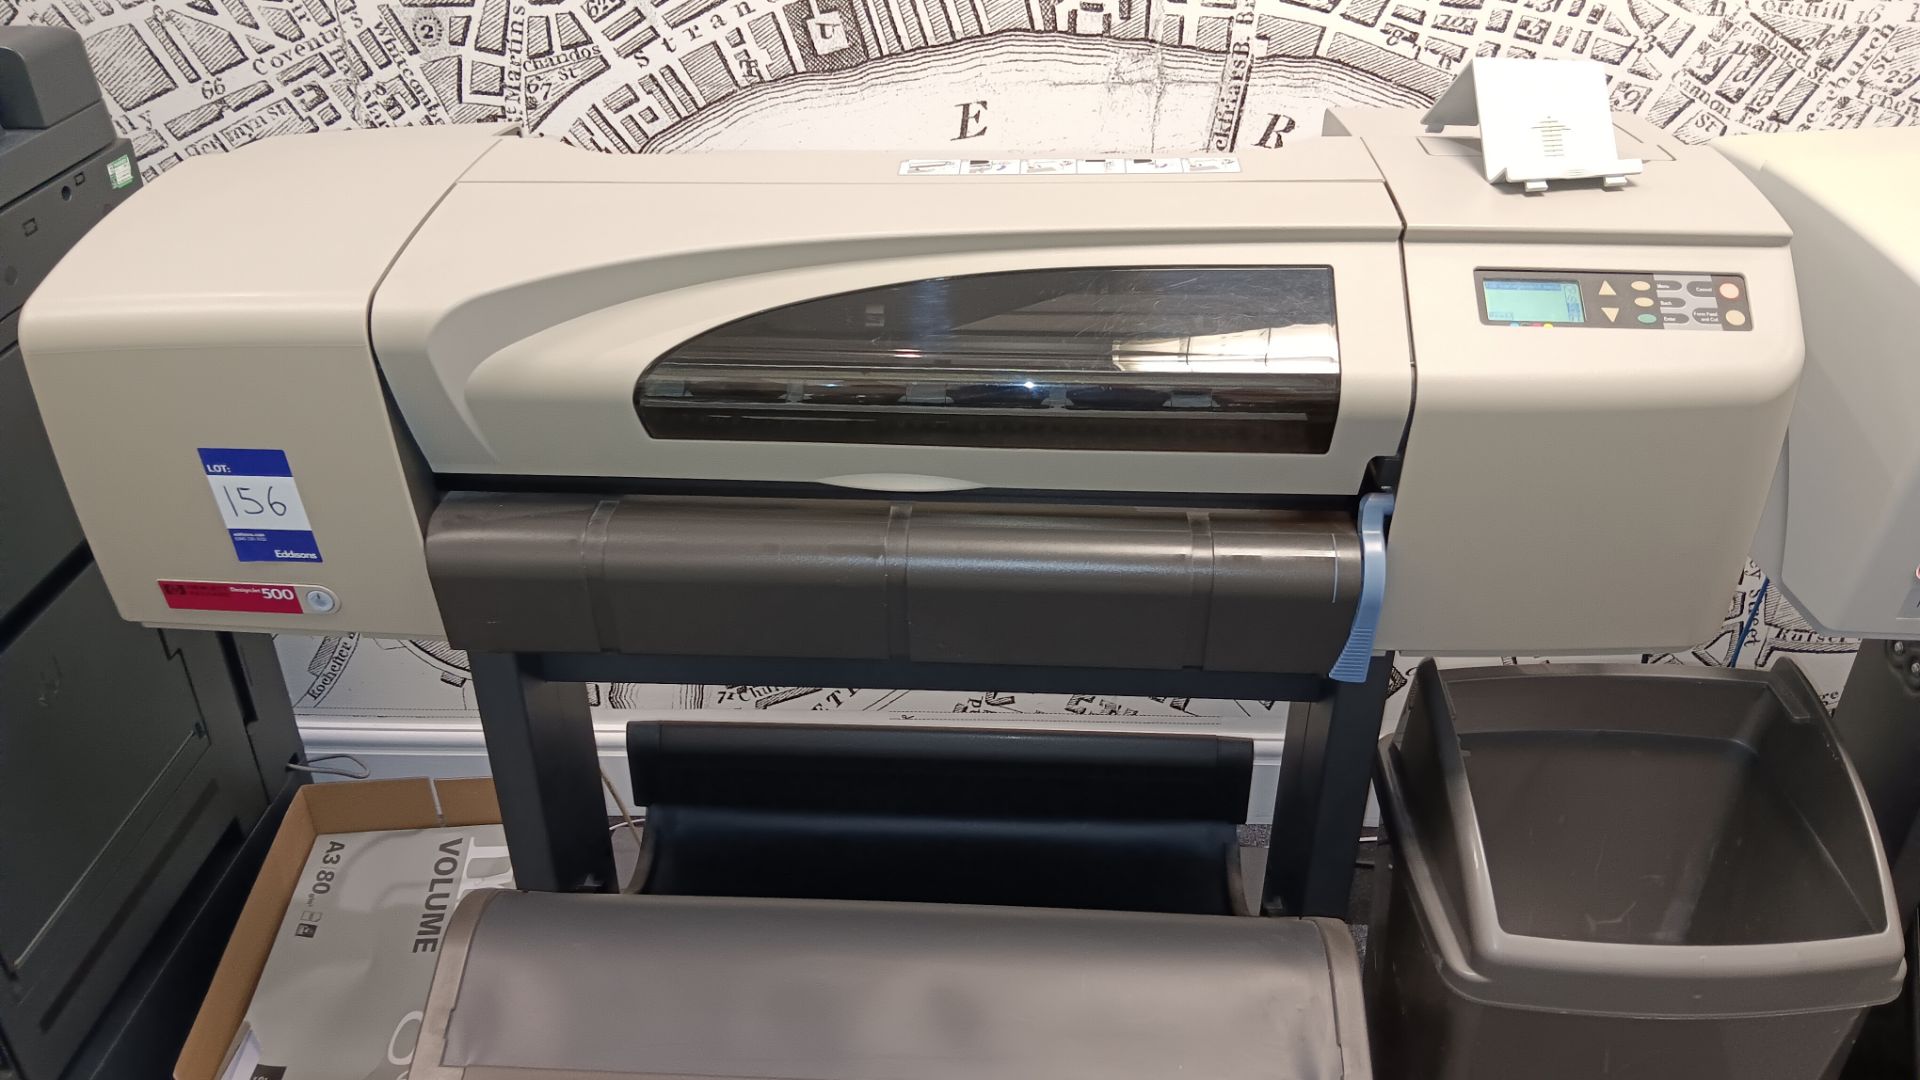 HP Designjet 500 C7769B 24in Roll Wide Format Printer, S/N ESA0701135 (Located on the 1st Floor) - Image 2 of 4